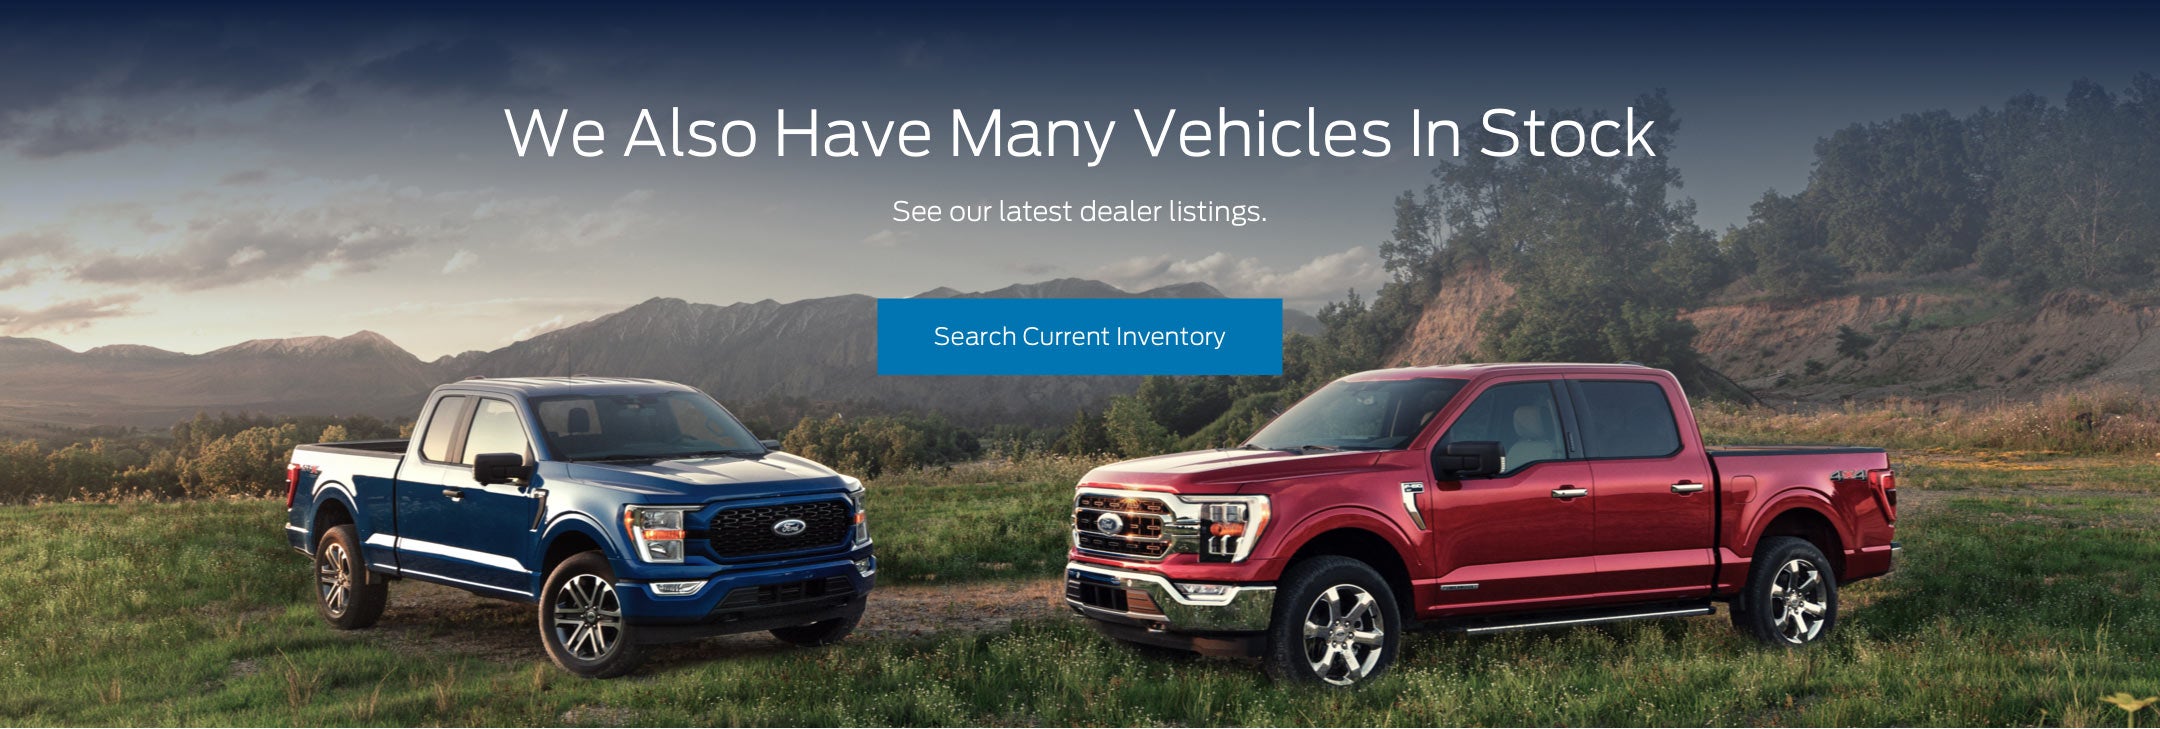 Ford vehicles in stock | Krapohl Ford & Lincoln in Mount Pleasant MI